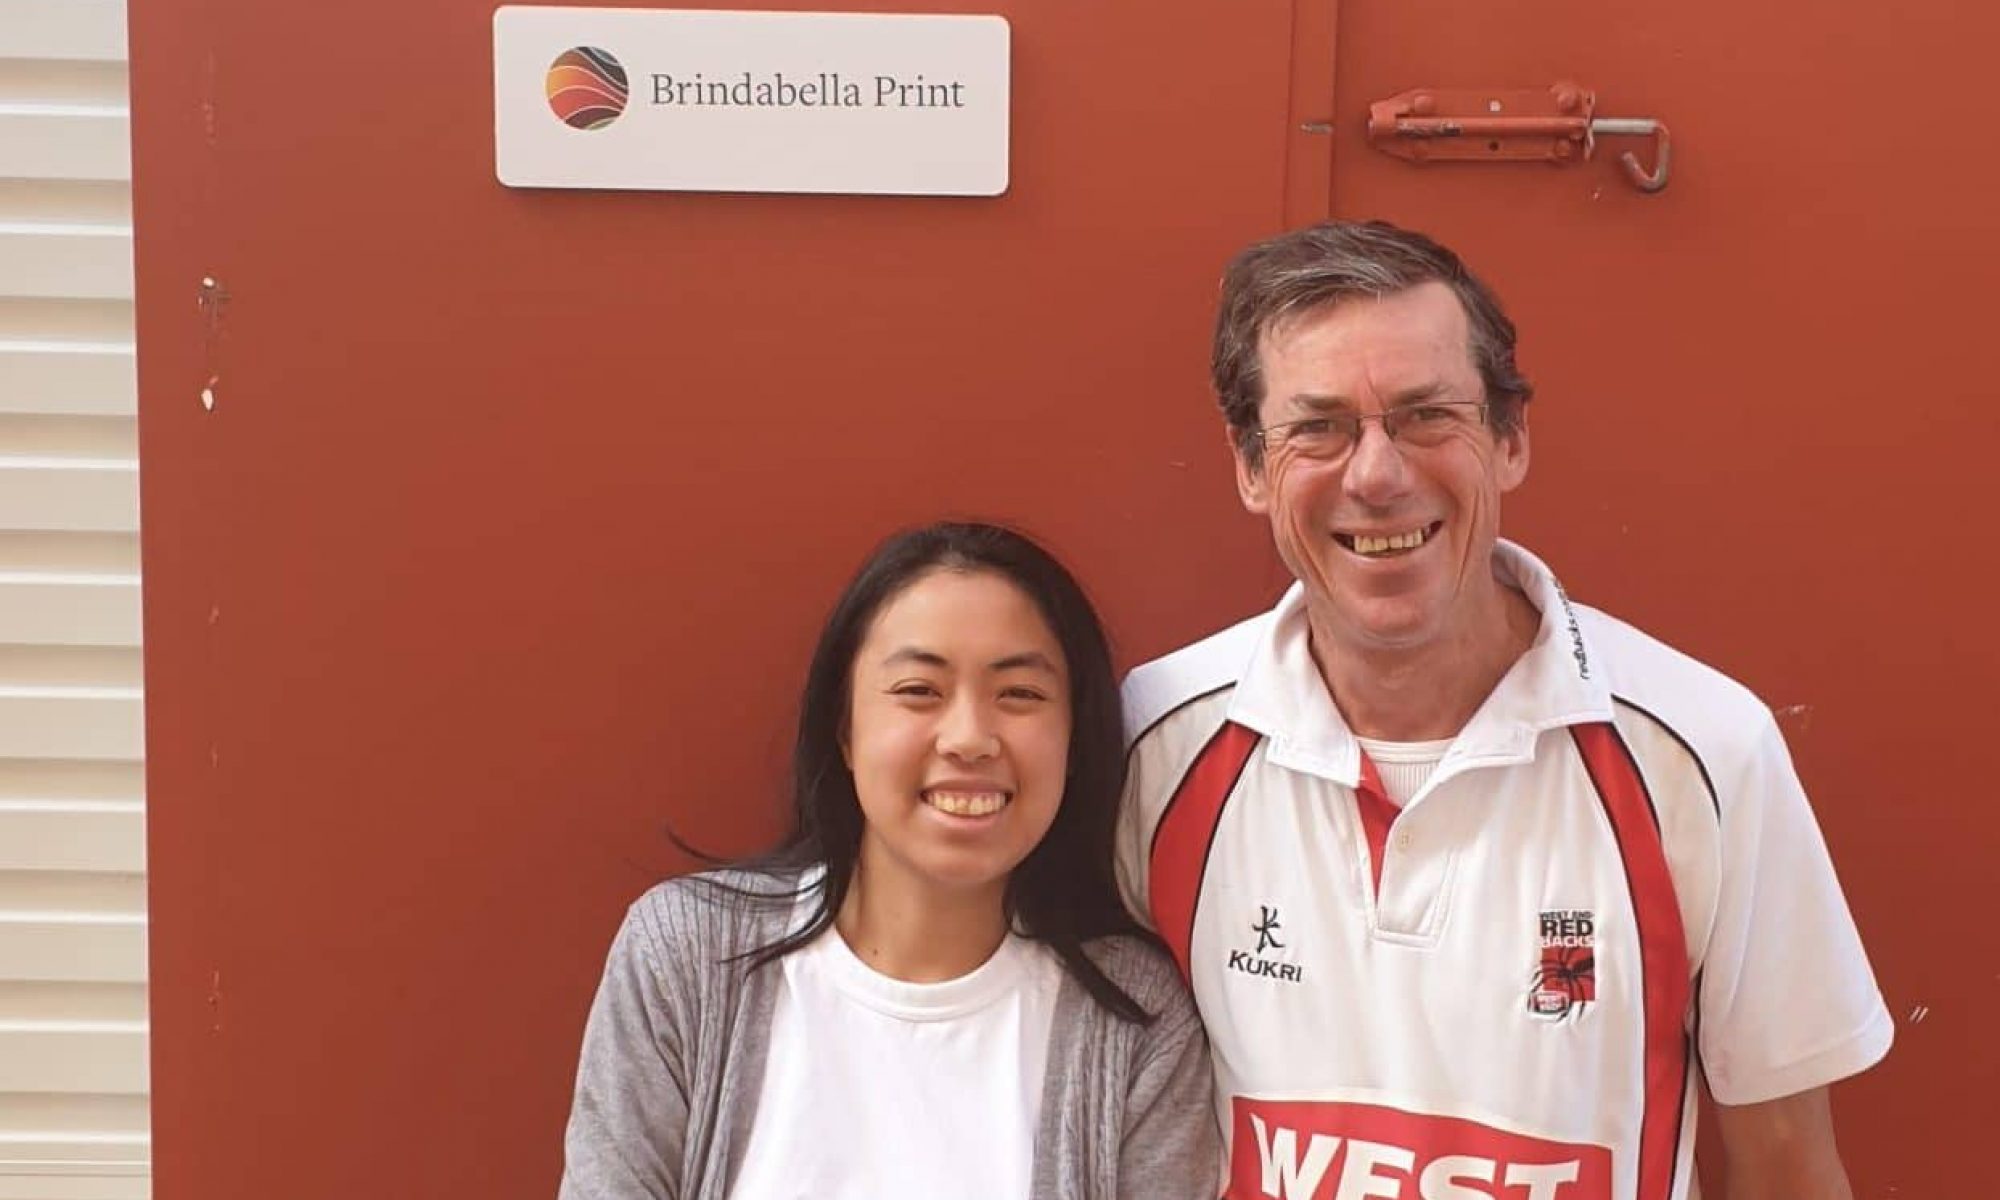 Members of the Brindabella Print Team - Kelsy is on the left while Sean is on the right